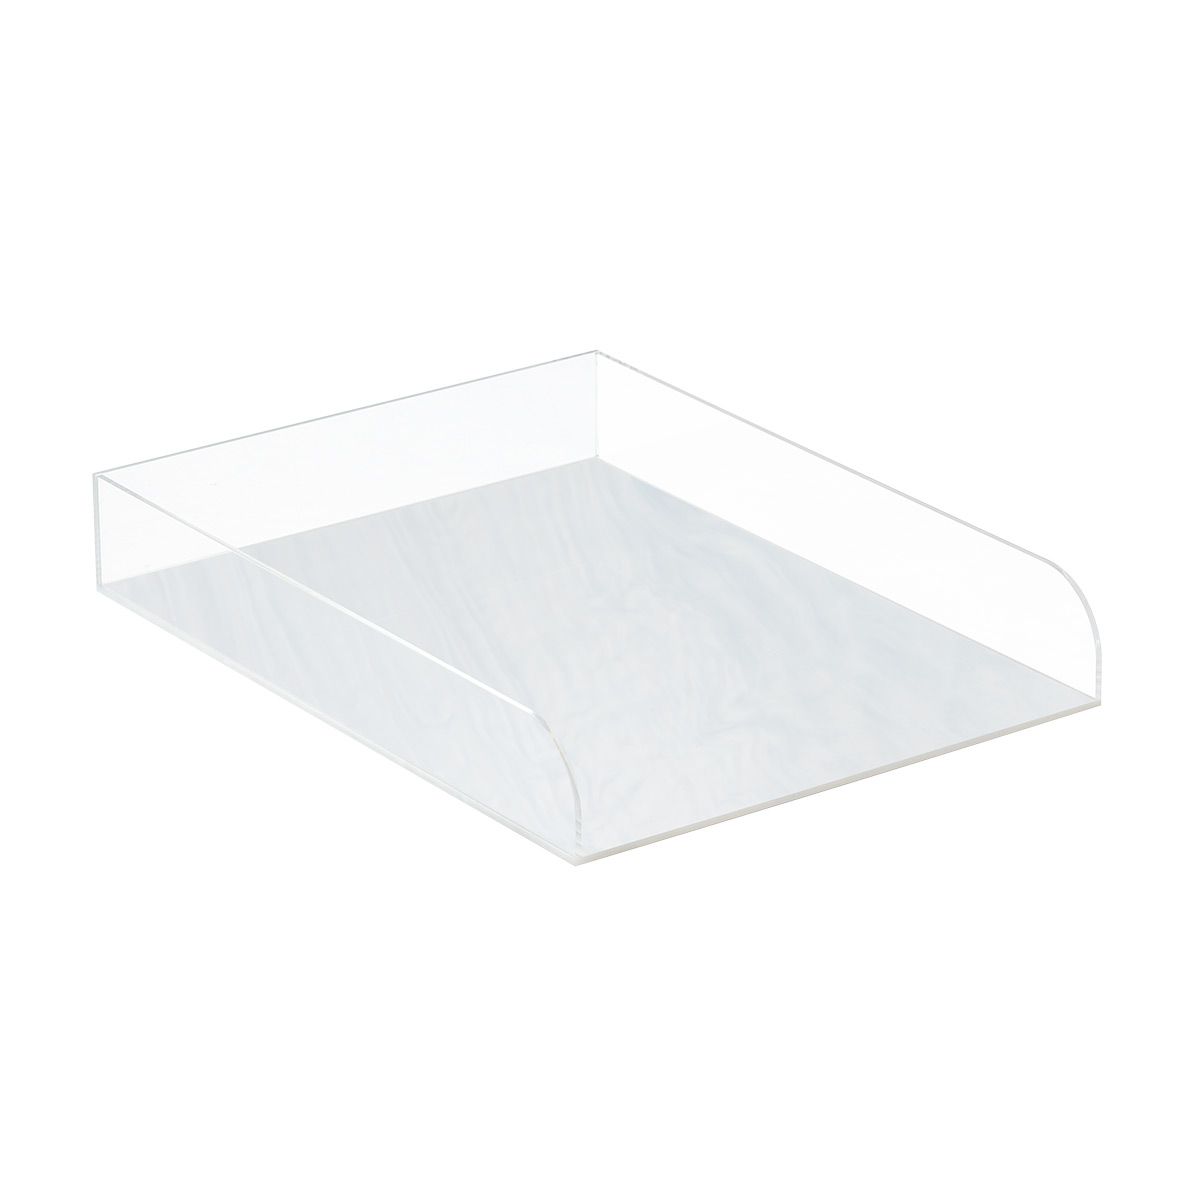 Lund London Blair Stacking Letter Tray Mother of Pearl | The Container Store